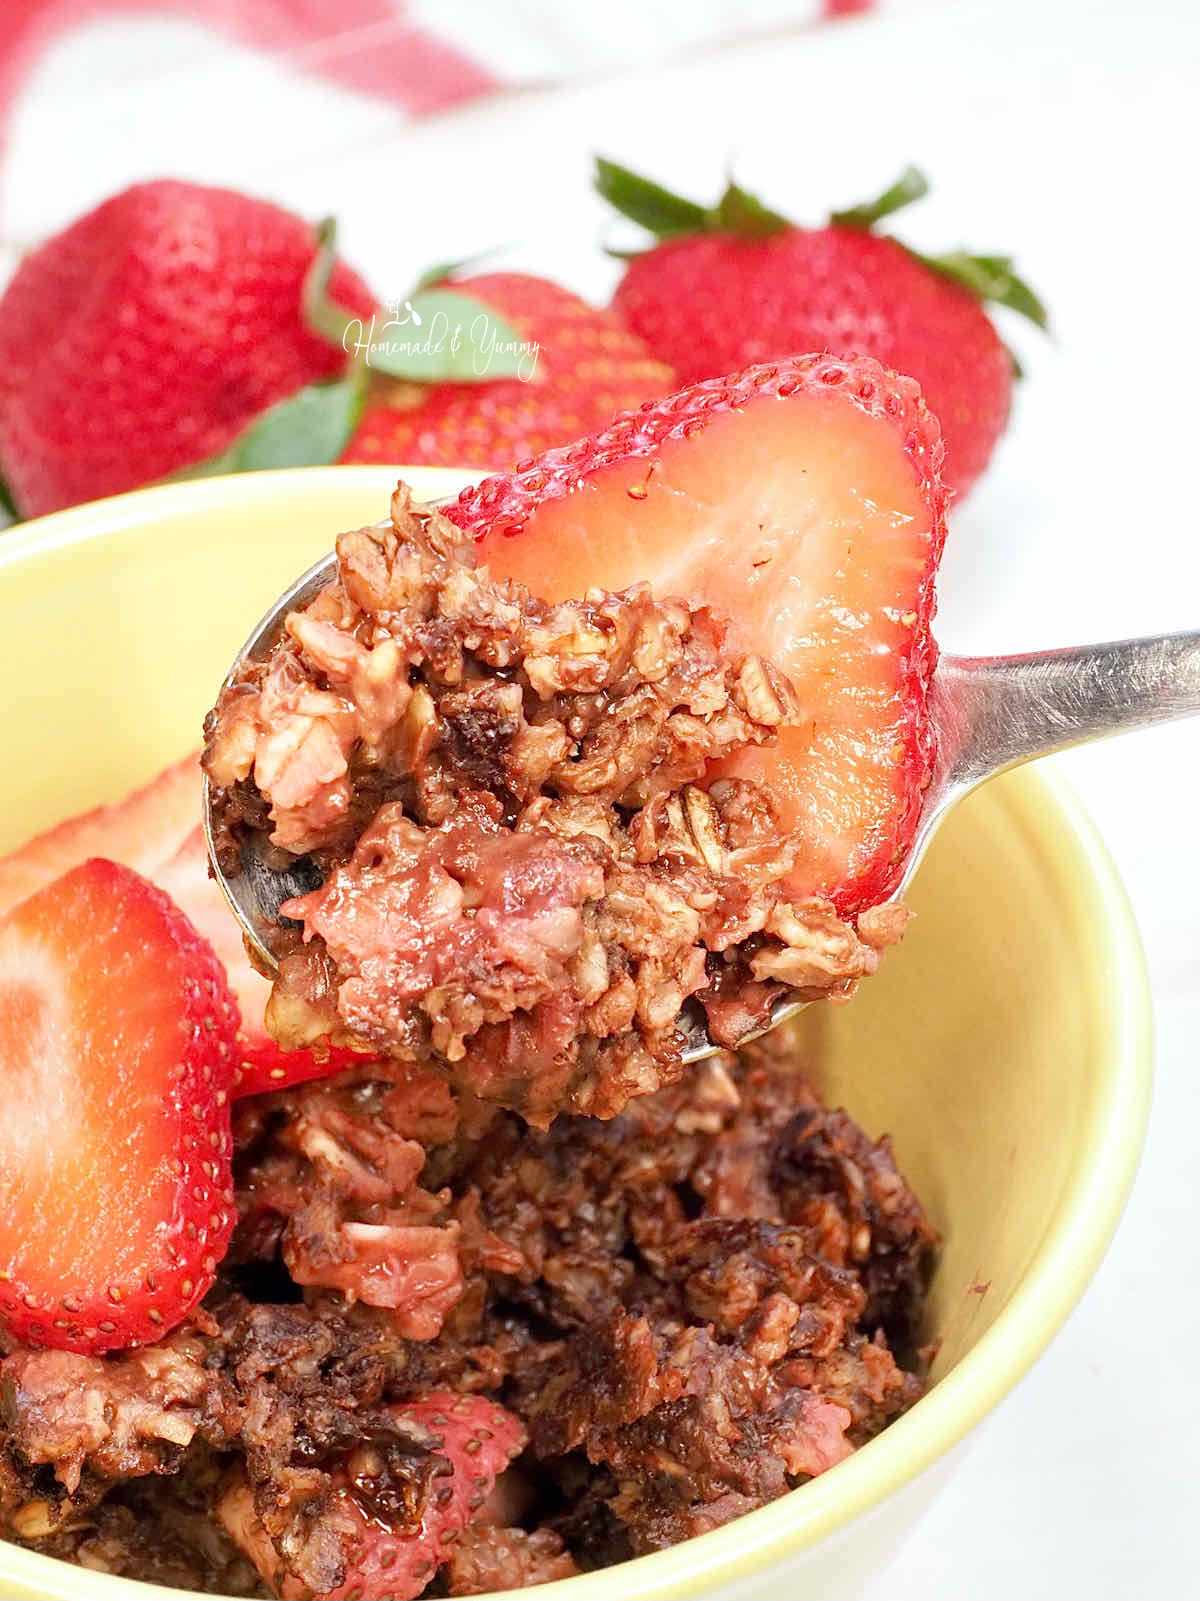 Cocoa baked oats for breakfast in a yellow bowl.